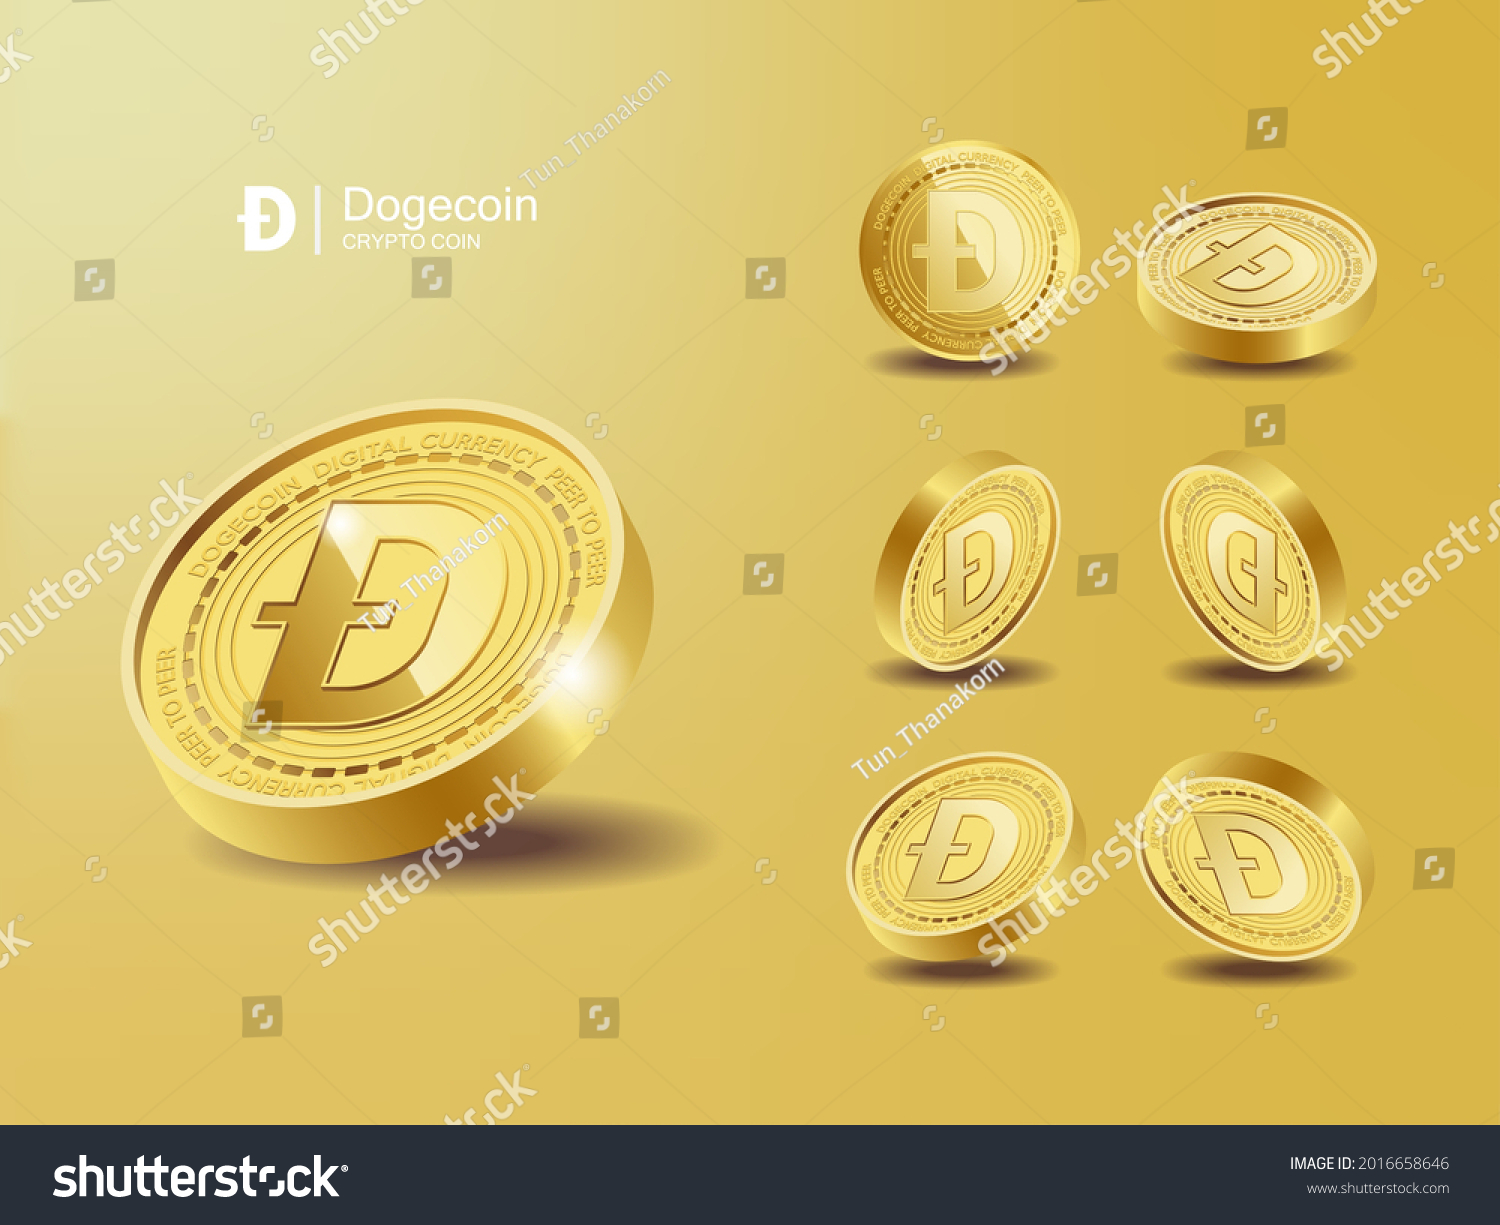 SVG of Dogecoin DOGE Cryptocurrency Coins. Perspective Illustration about Crypto Coins. svg